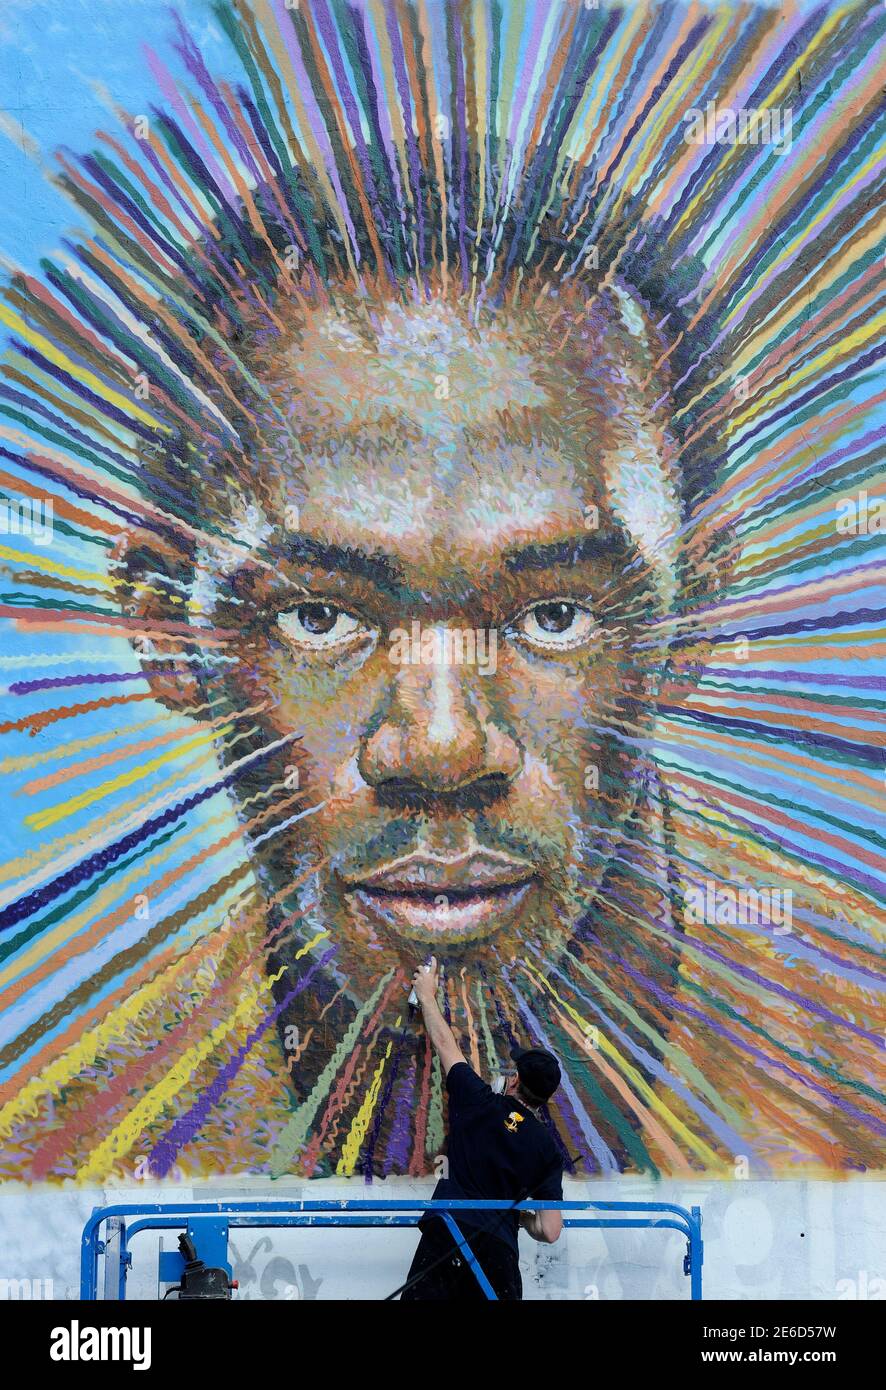 Street artist James Cochran, also known as Jimmy C, works on his spray painted picture of Jamaican sprinter Usain Bolt in Sclater street car park in east London July 19, 2012. Cochran said this was done as an homage to the London 2012 Olympic Games, which begin July 27. REUTERS/Paul Hackett  (BRITAIN - Tags: SPORT OLYMPICS ATHLETICS ENTERTAINMENT TPX IMAGES OF THE DAY) Stock Photo